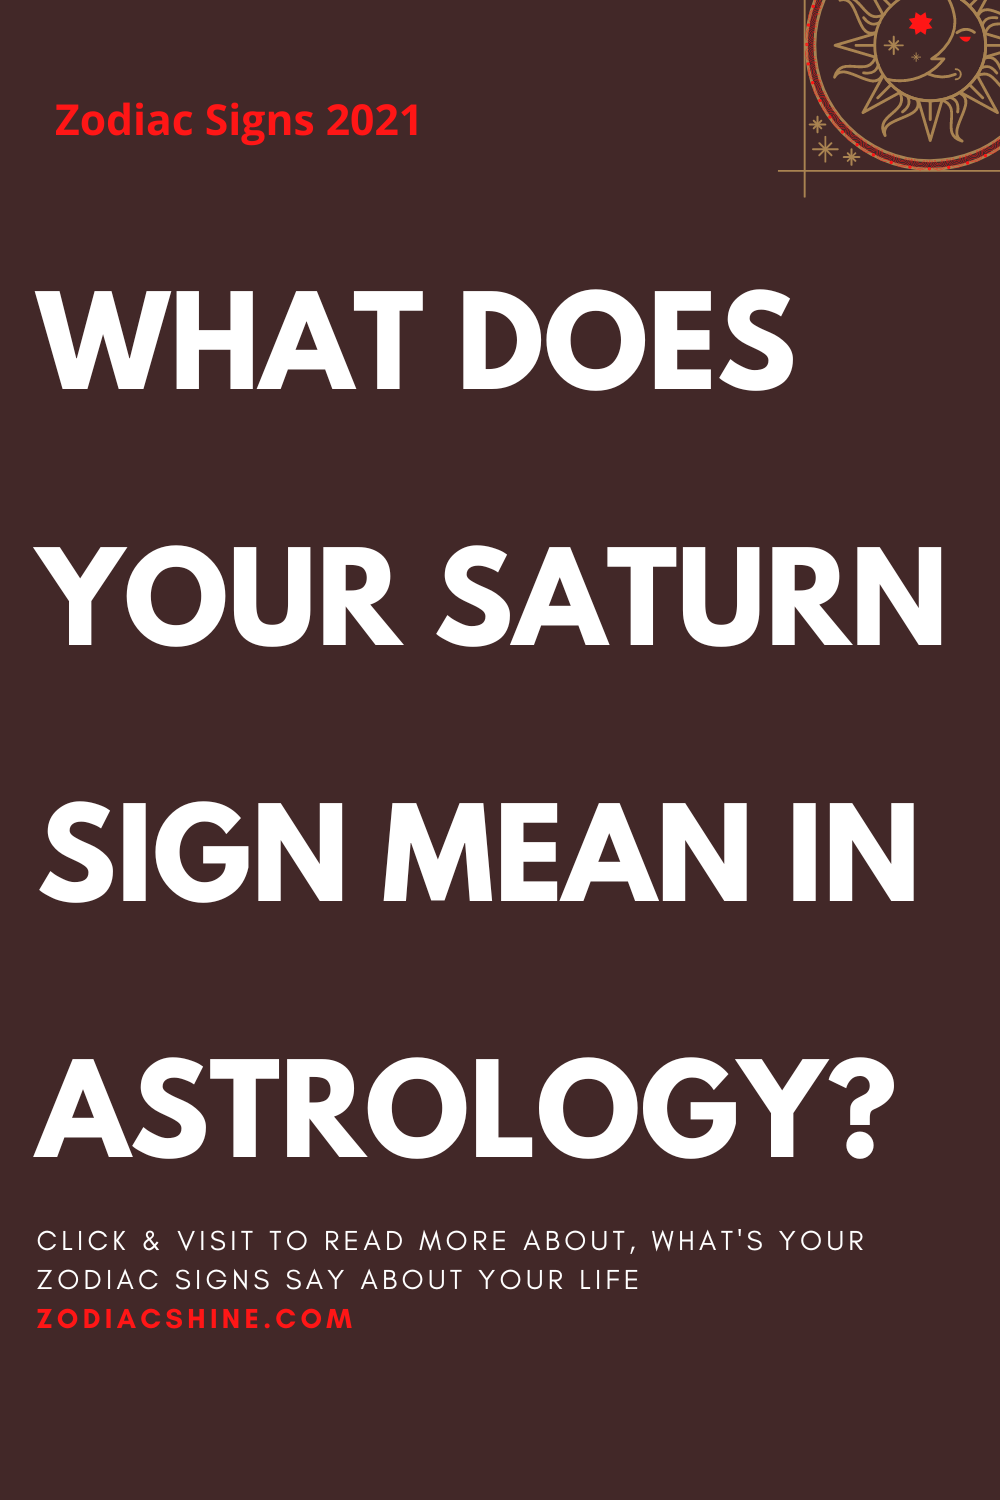 WHAT DOES YOUR SATURN SIGN MEAN IN ASTROLOGY?